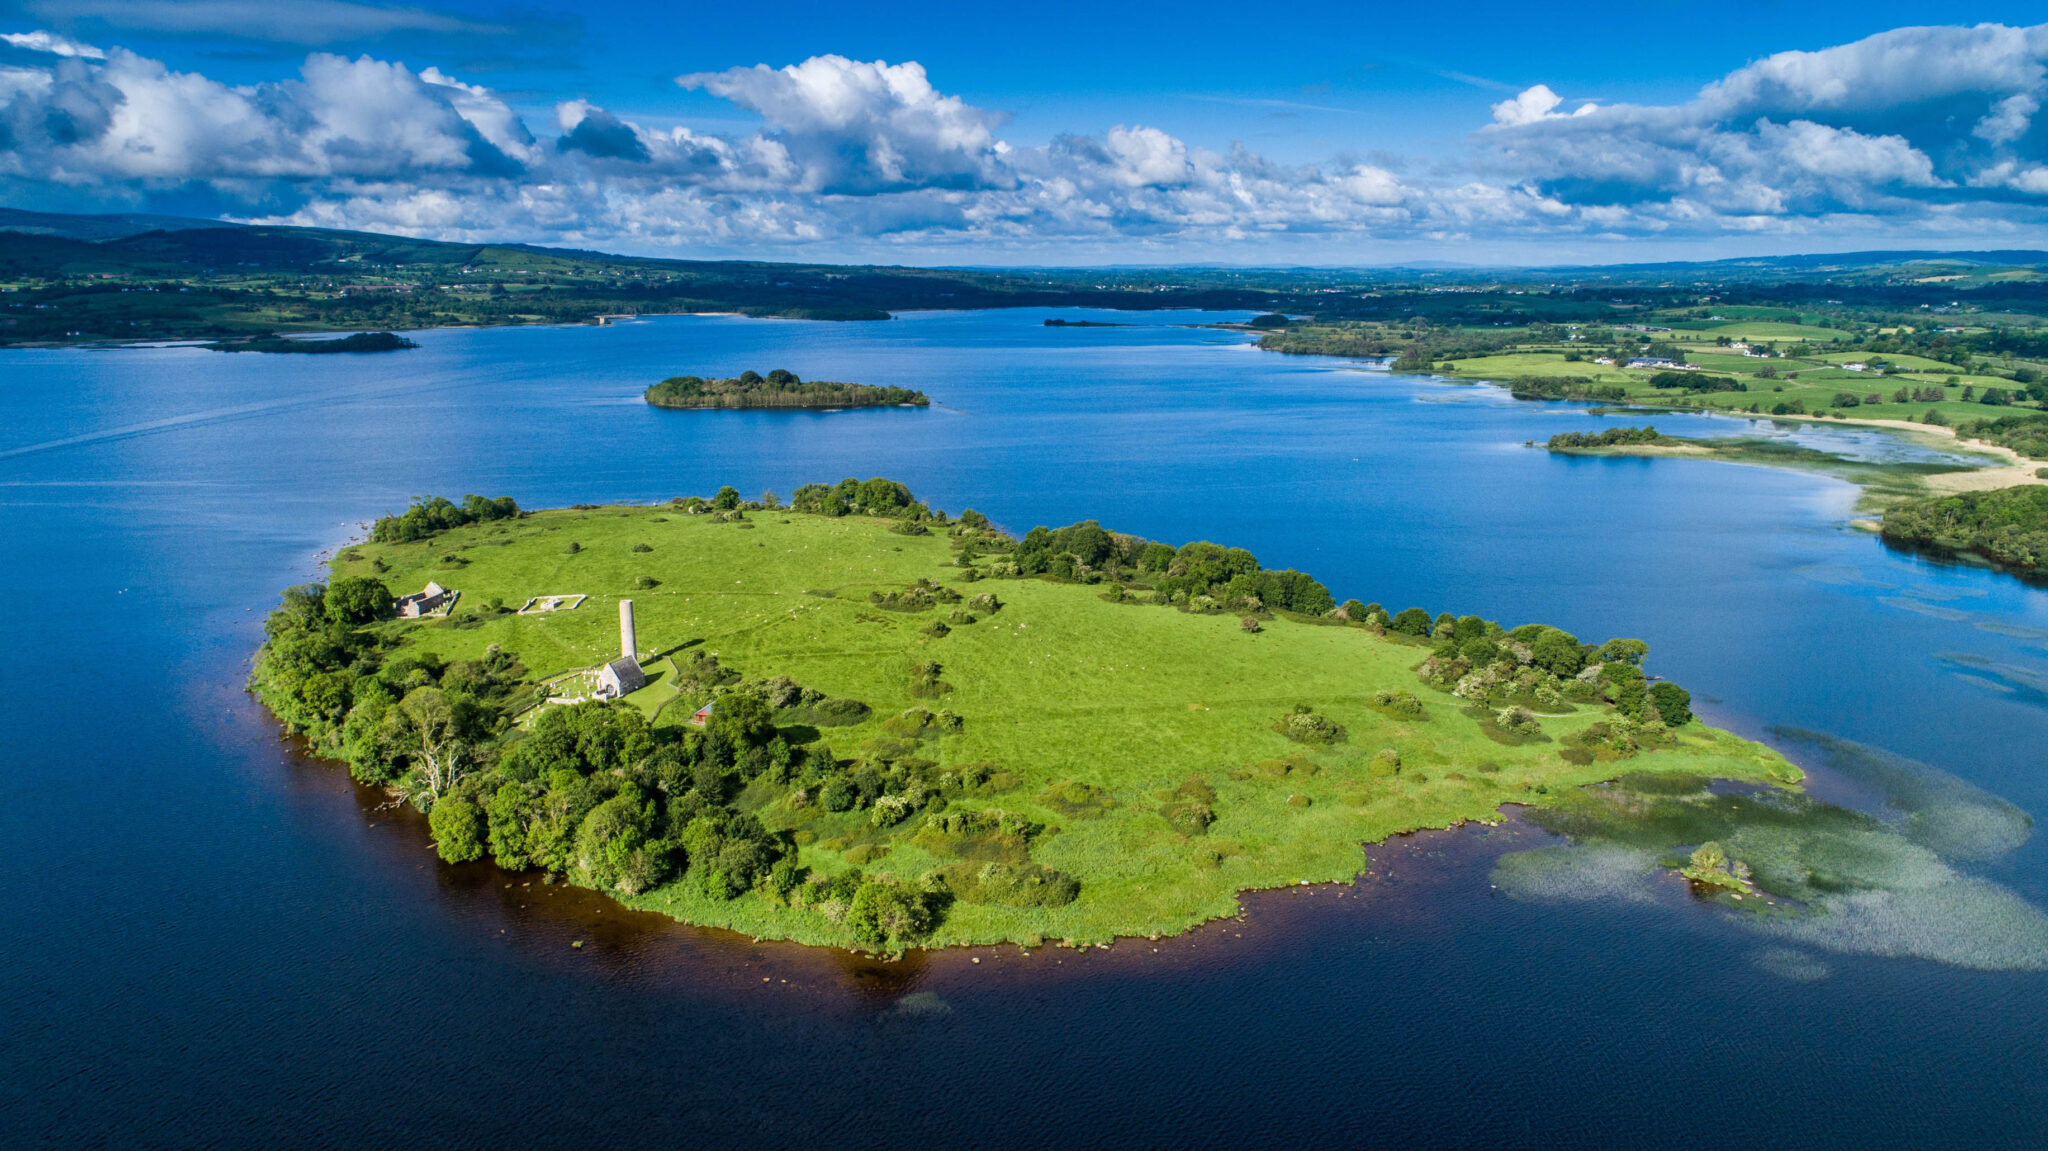 Inis Cealtra (Holy Island) on Lough Derg in County Clare.